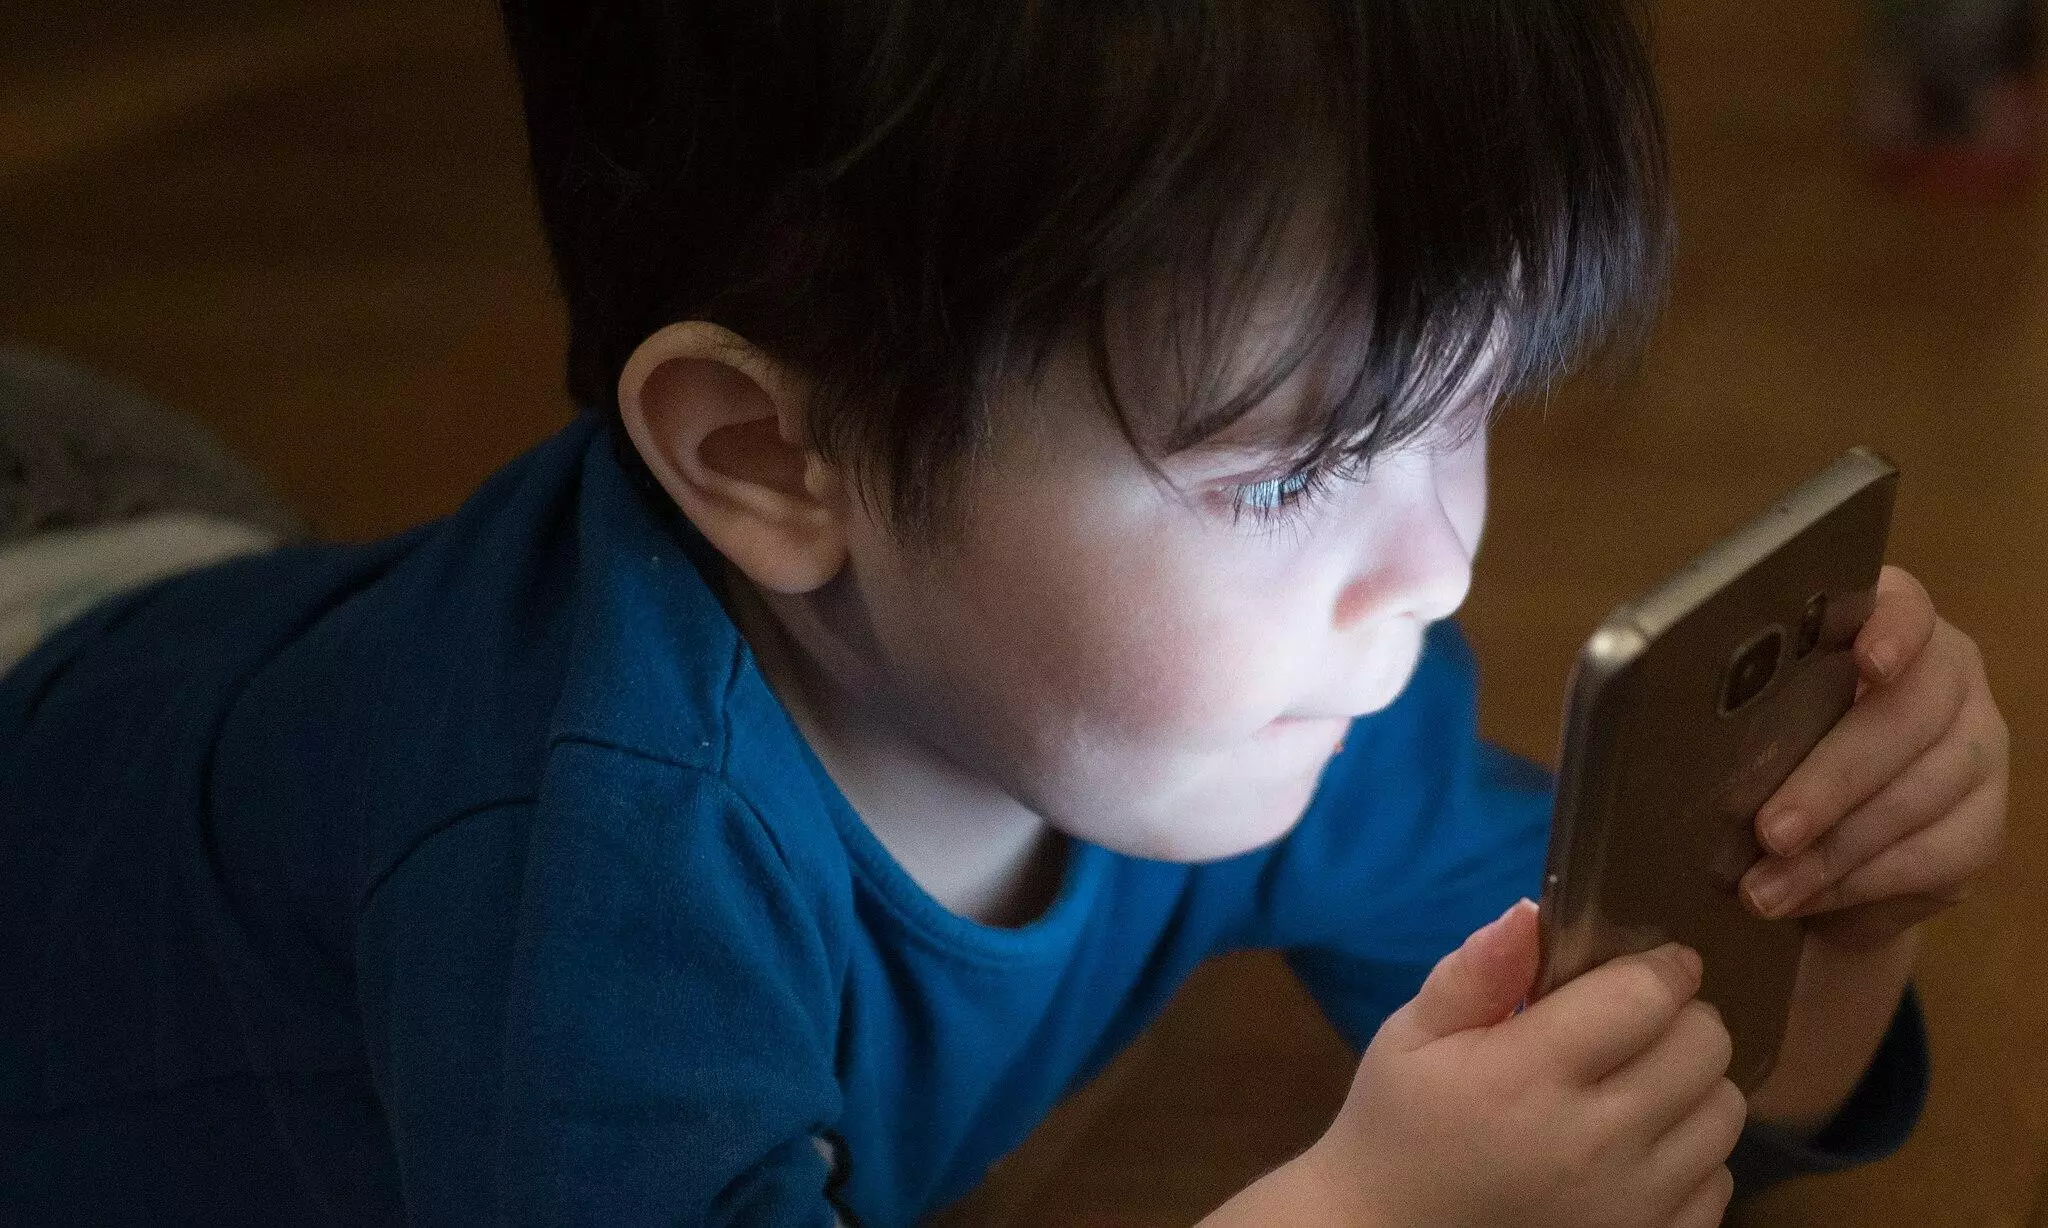 Children soothed with digital devices could have anger issues in future: Study